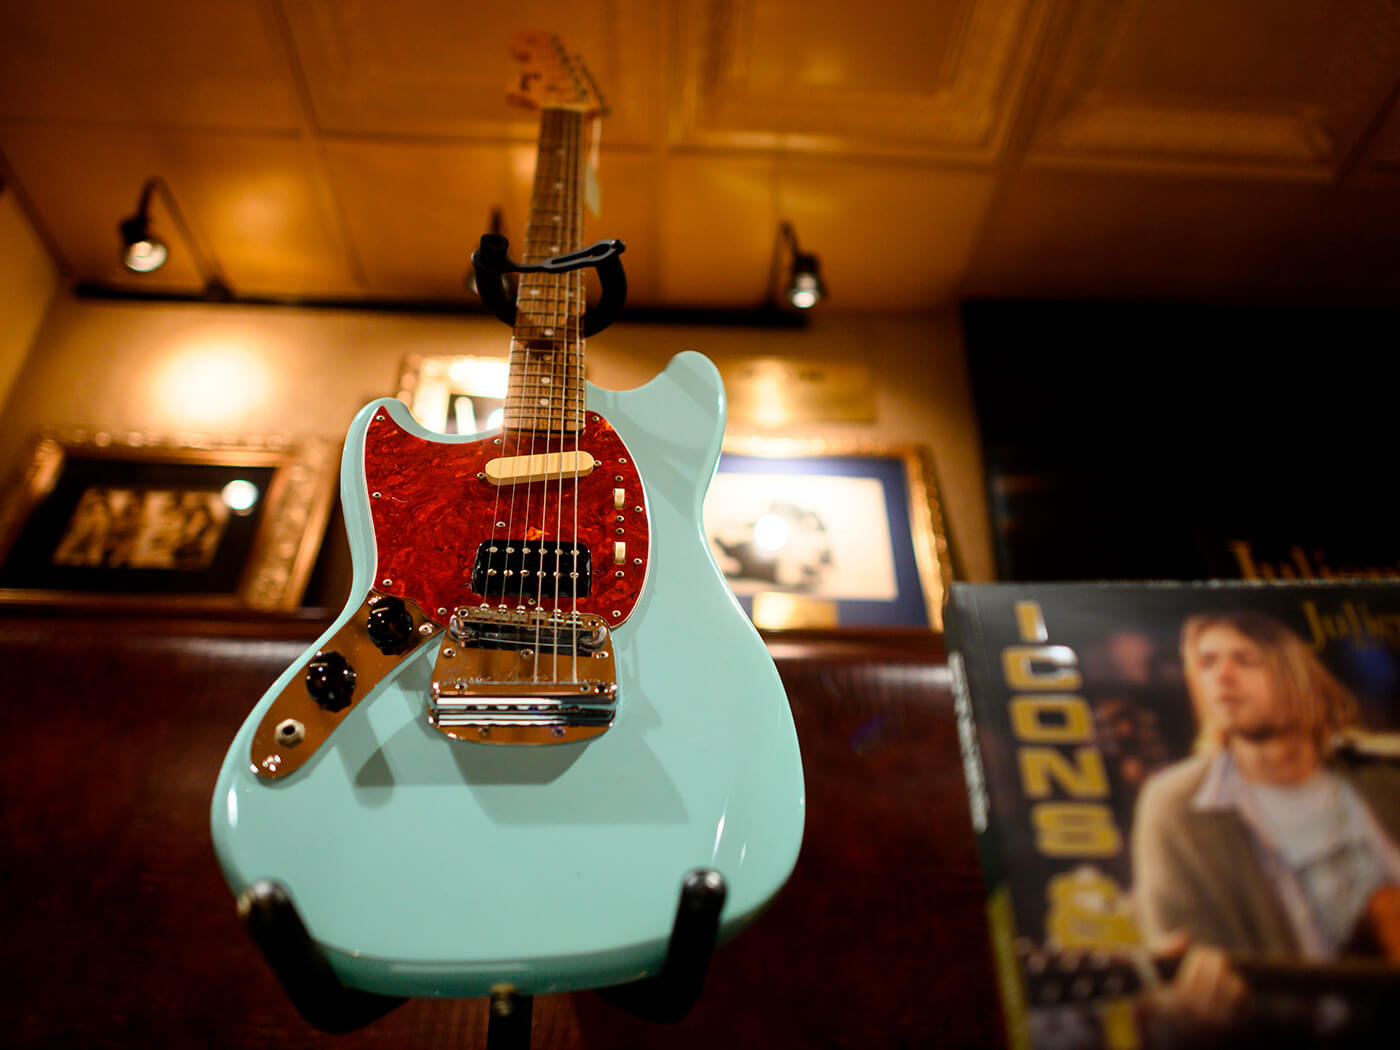 Kurt Cobain’s custom-built left-handed Fender Mustang on display at Hard Rock Cafe in New York City in 2019, photo by Johannes Eisele/AFP via Getty Images